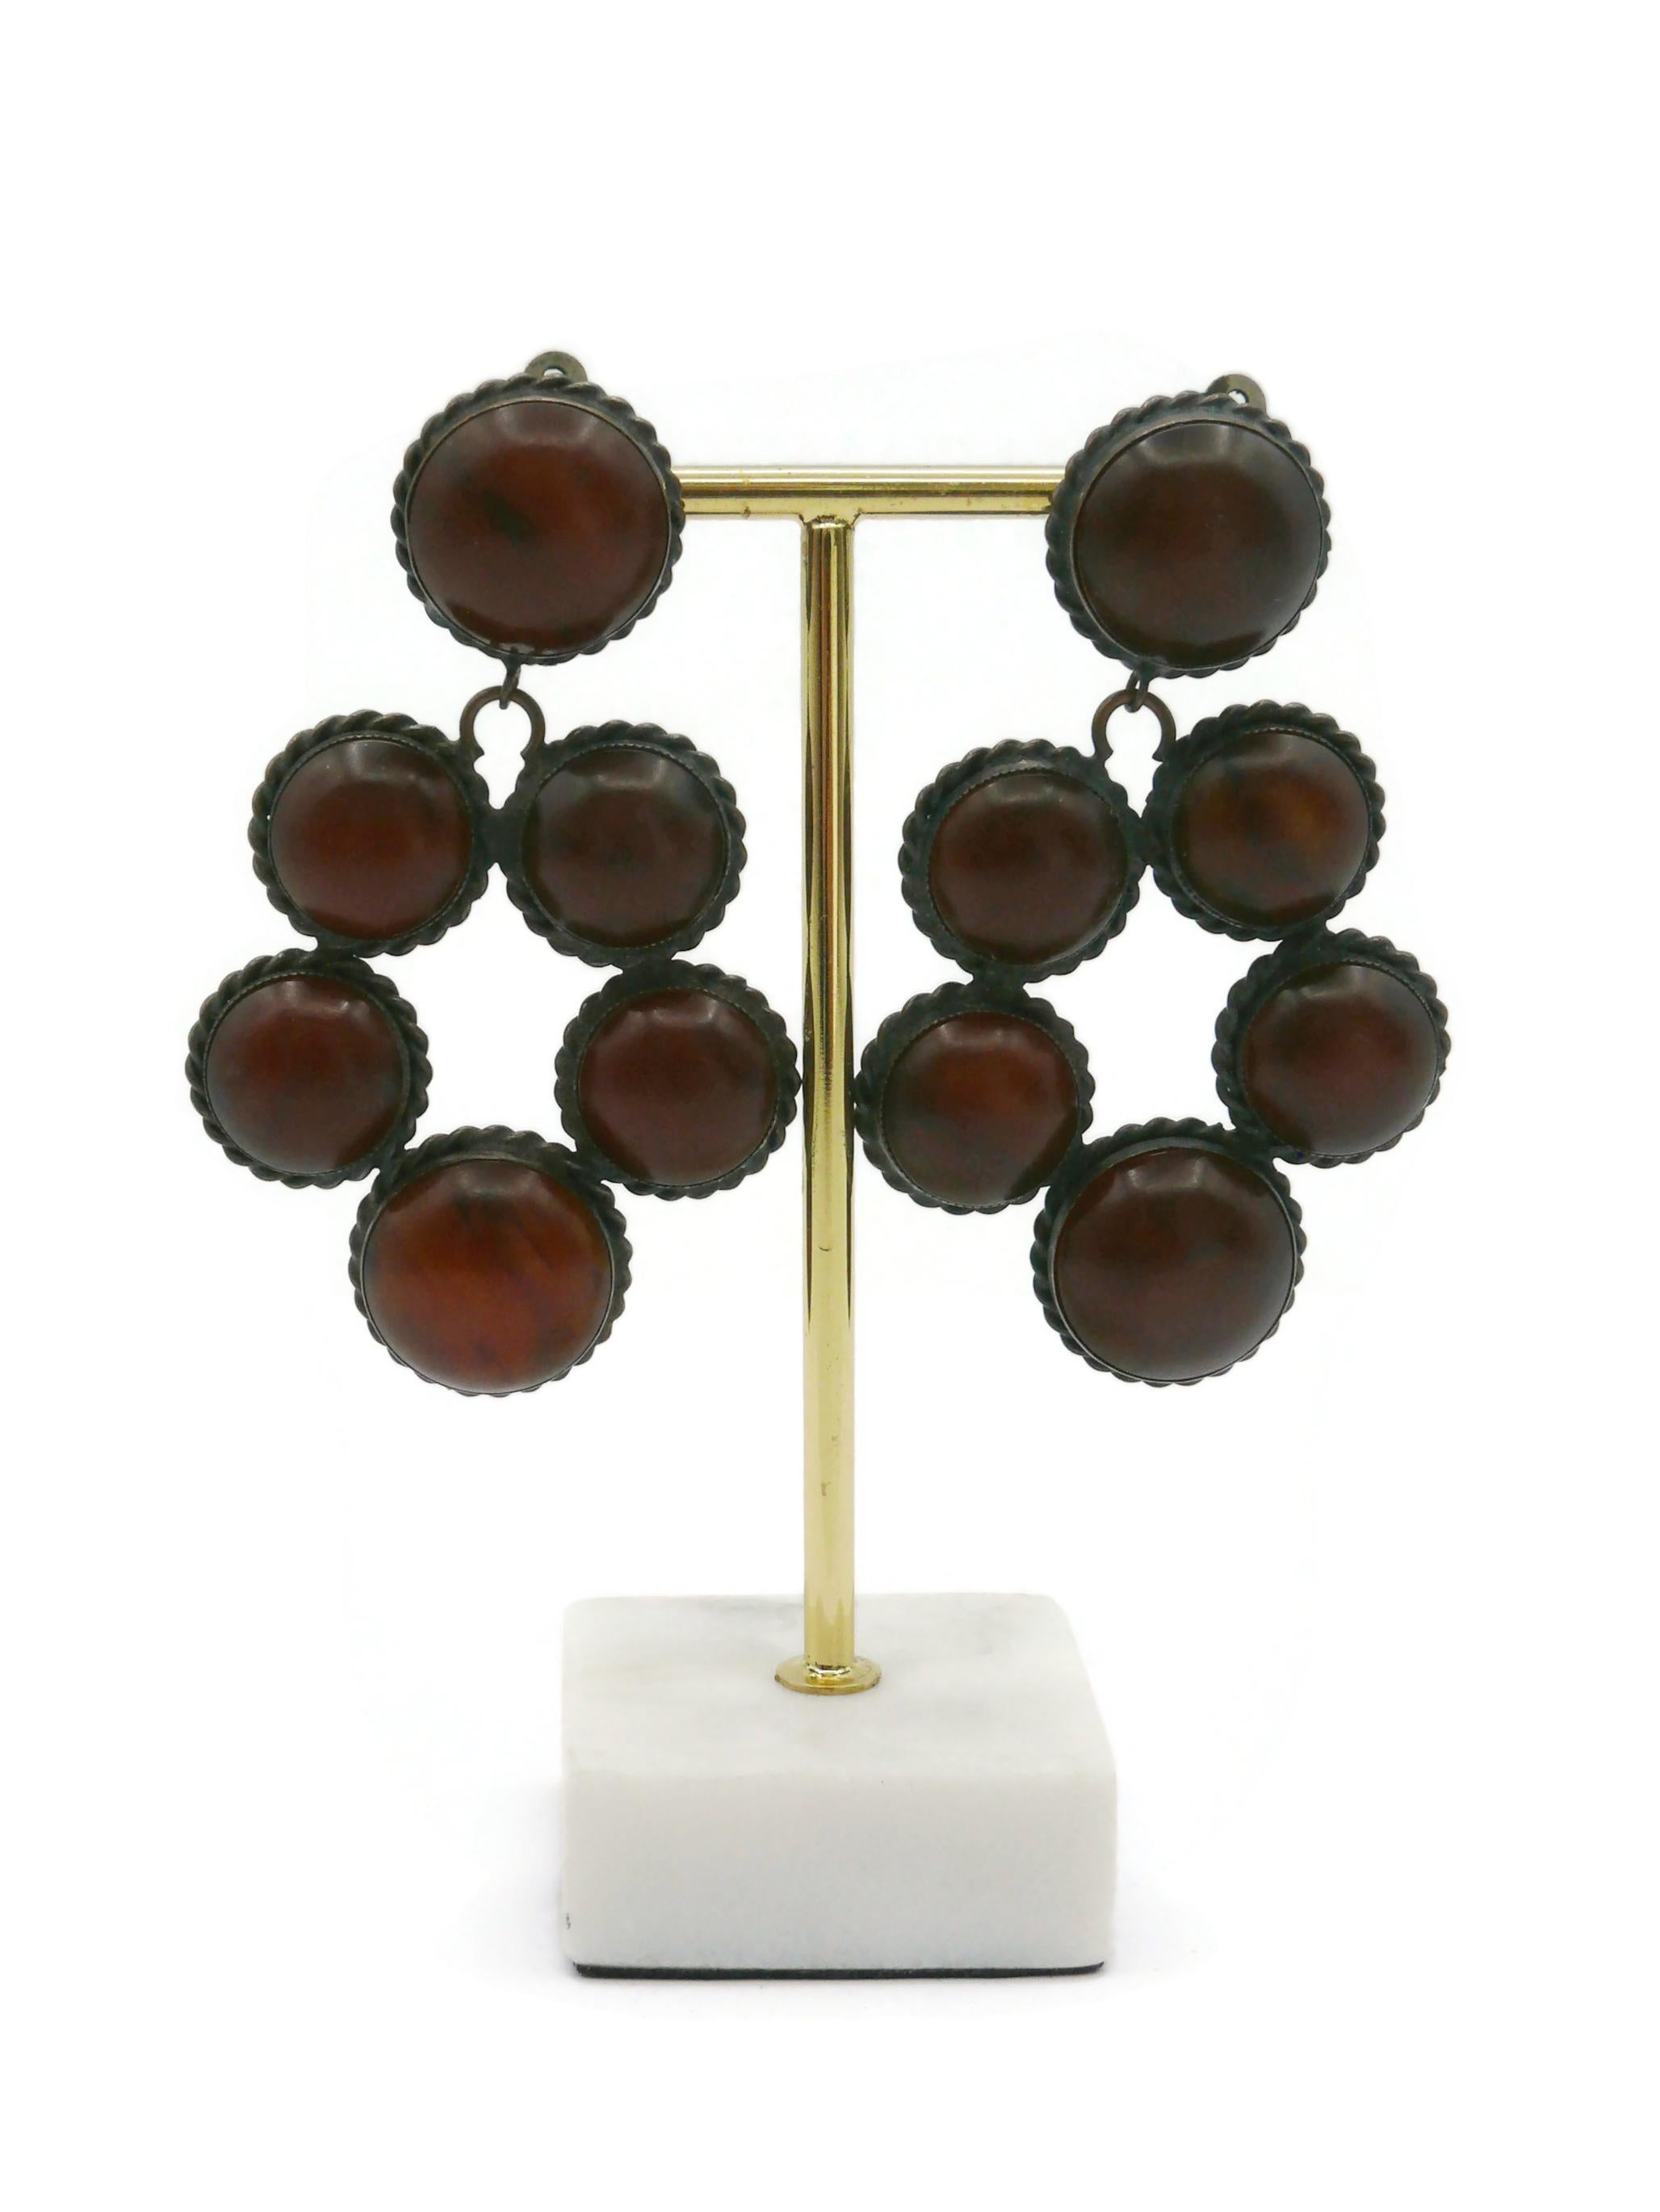 YVES SAINT LAURENT by ROGER SCEMAMA Vintage Dangling Earrings In Good Condition For Sale In Nice, FR